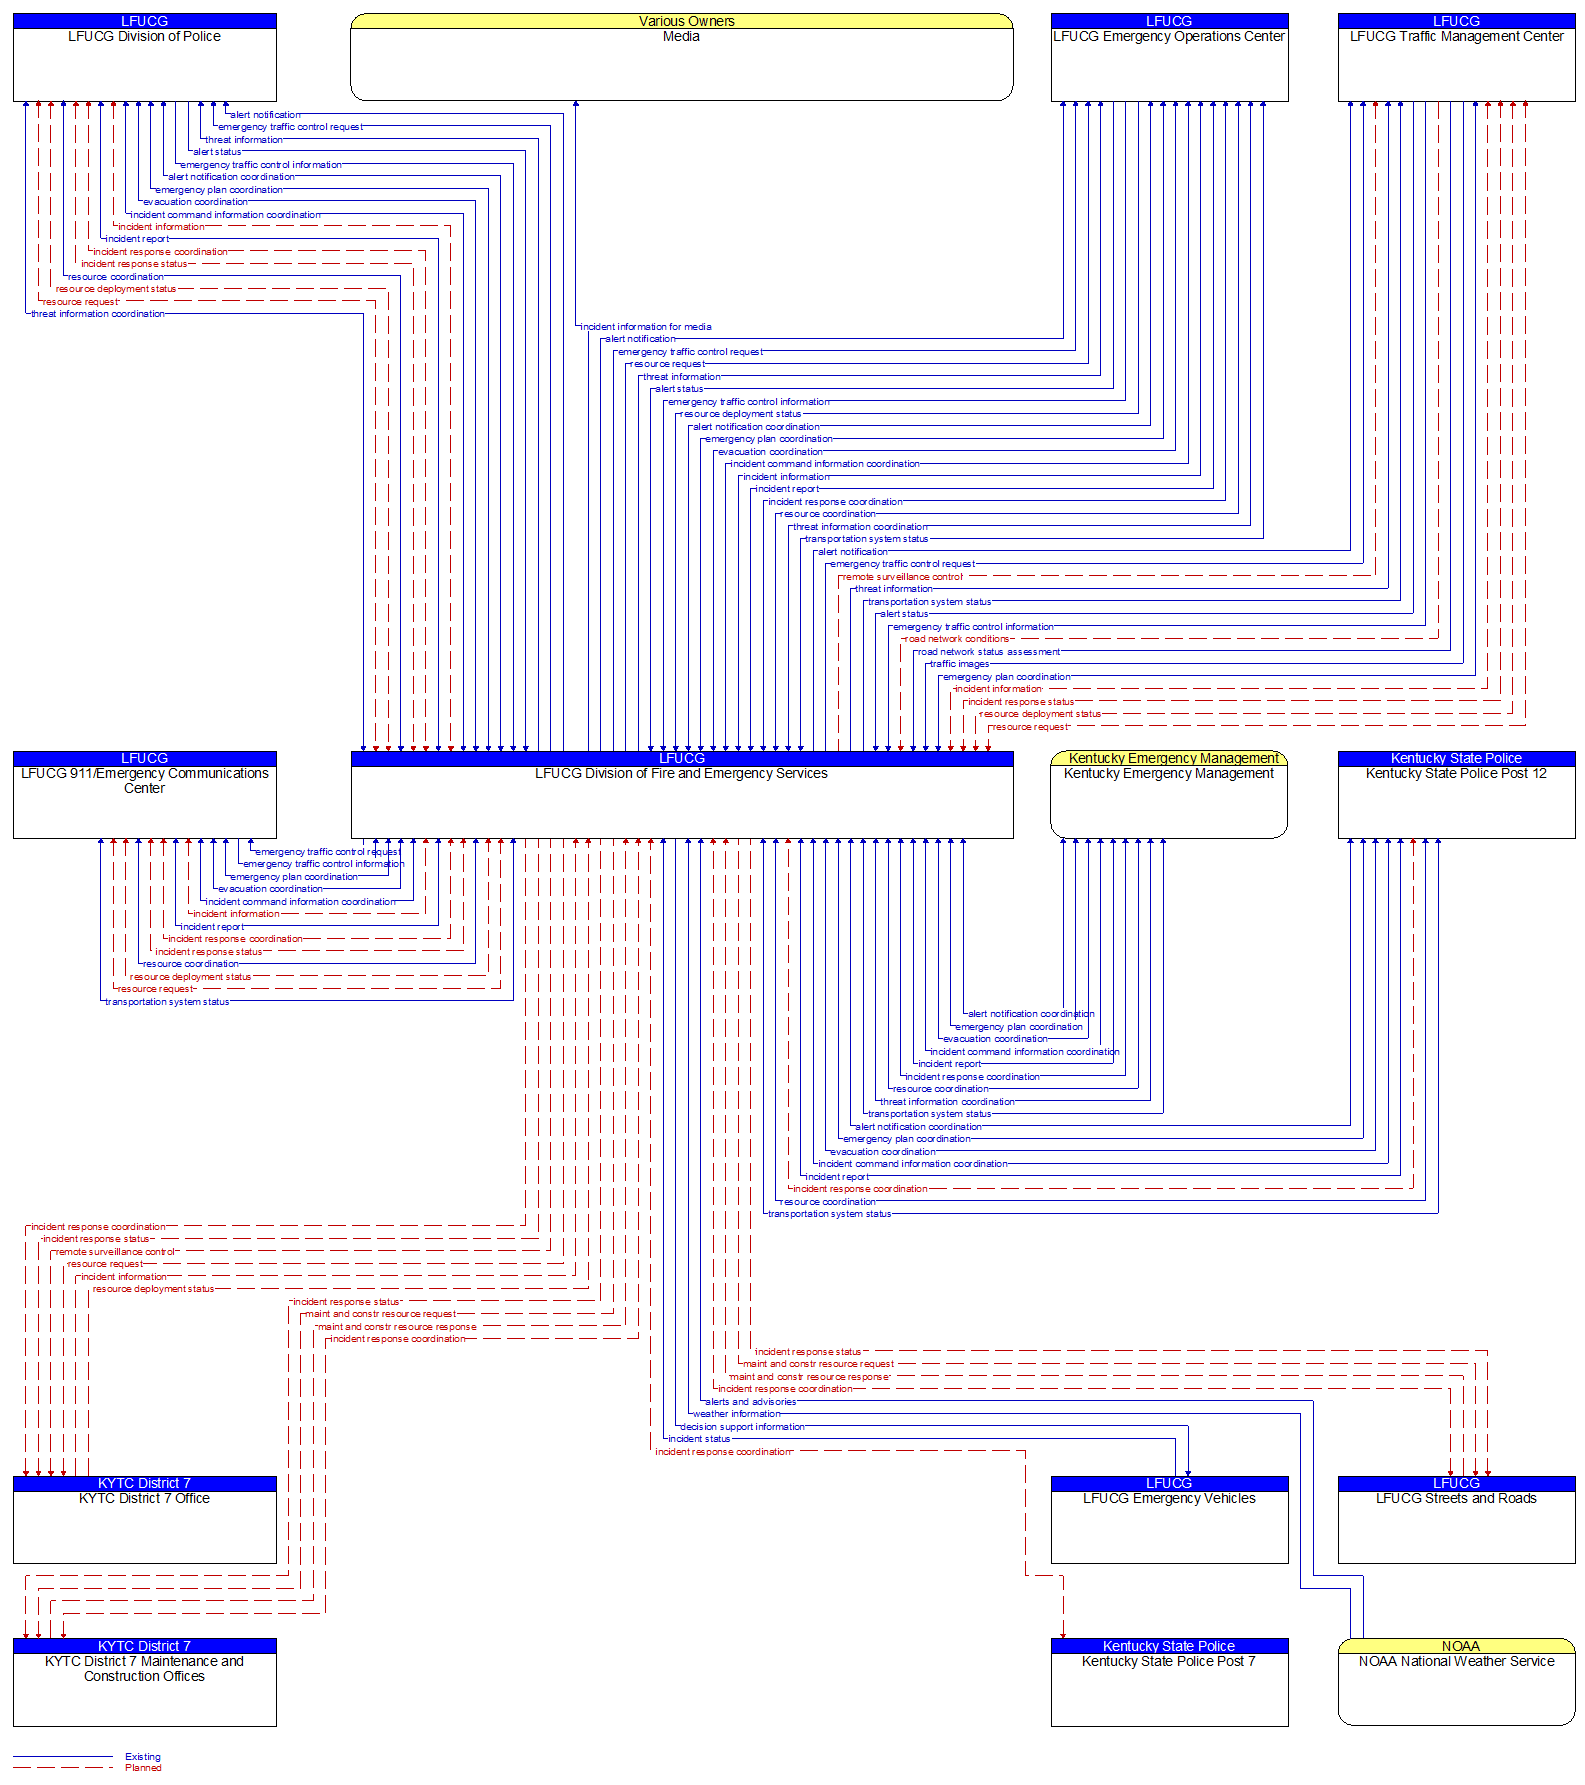 Context Diagram - LFUCG Division of Fire and Emergency Services